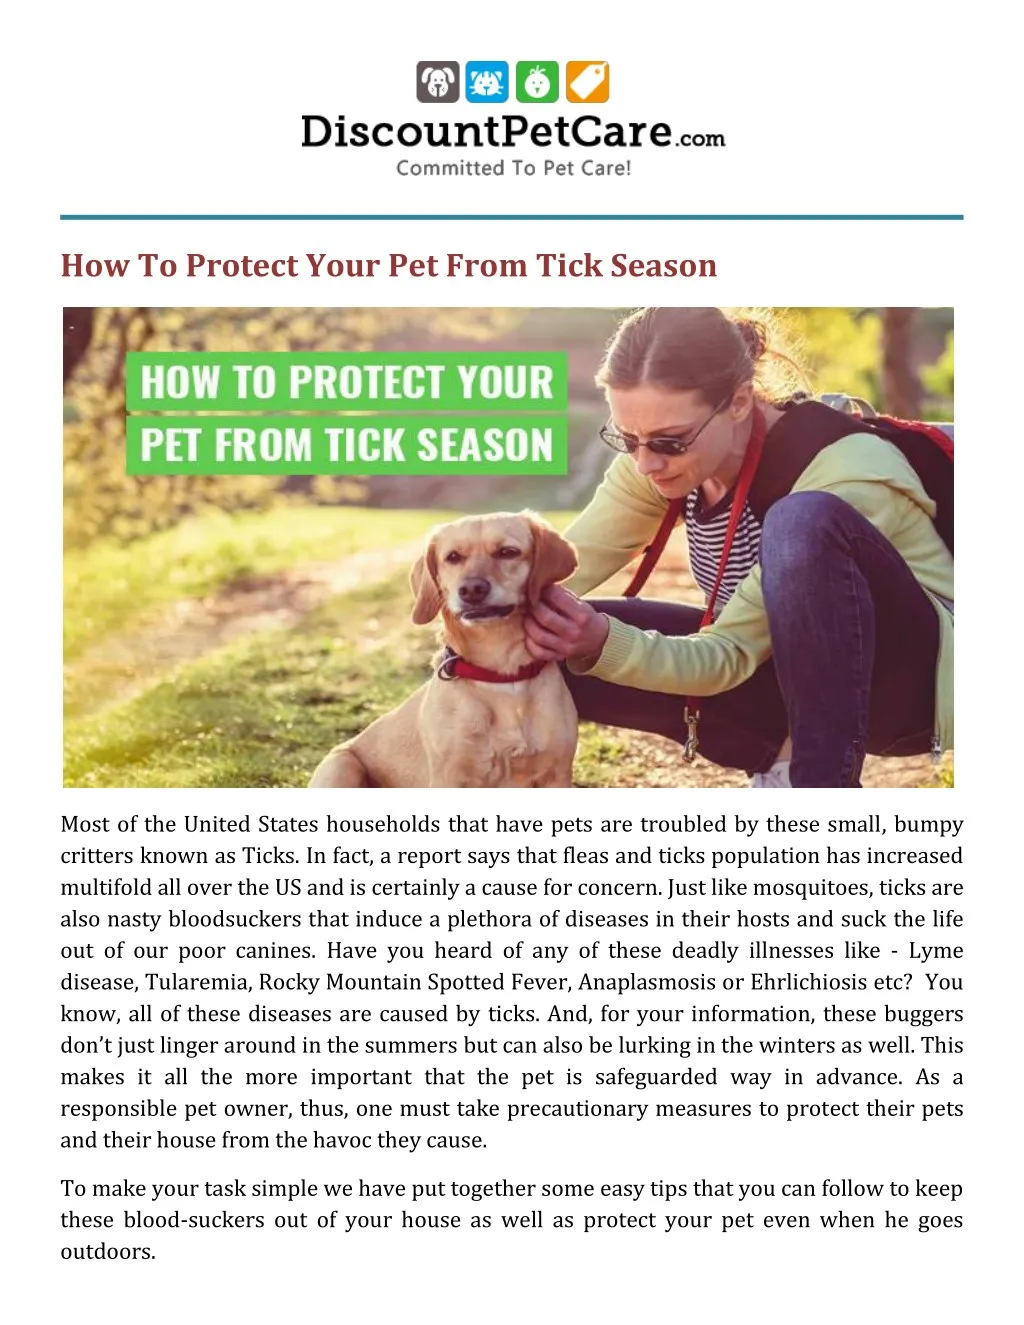 how to protect your pet from tick season